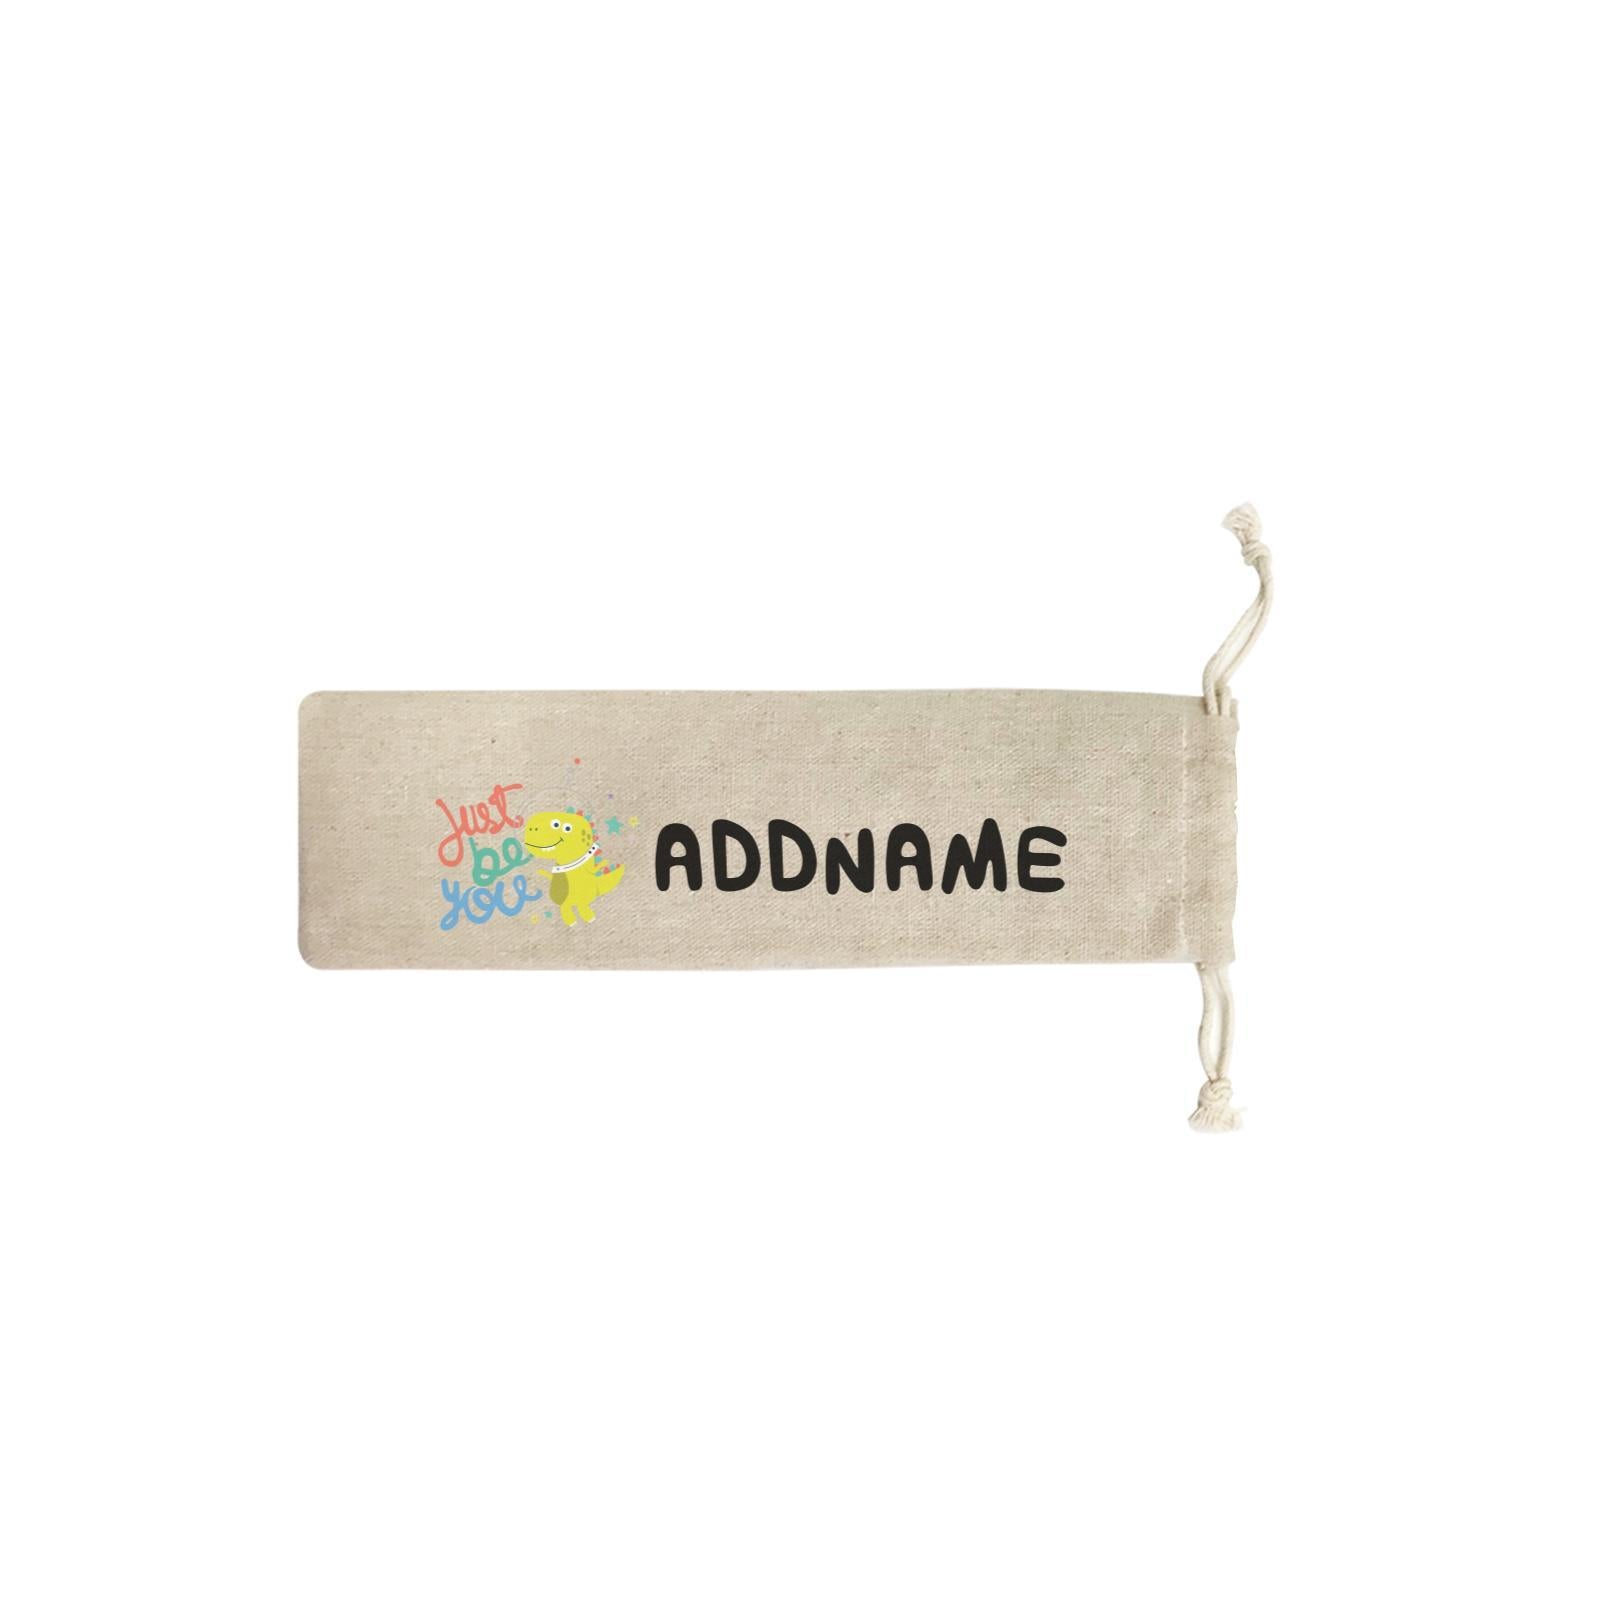 Children's Day Gift Series Just Be You Space Dinosaur Addname SB Straw Pouch (No Straws included)